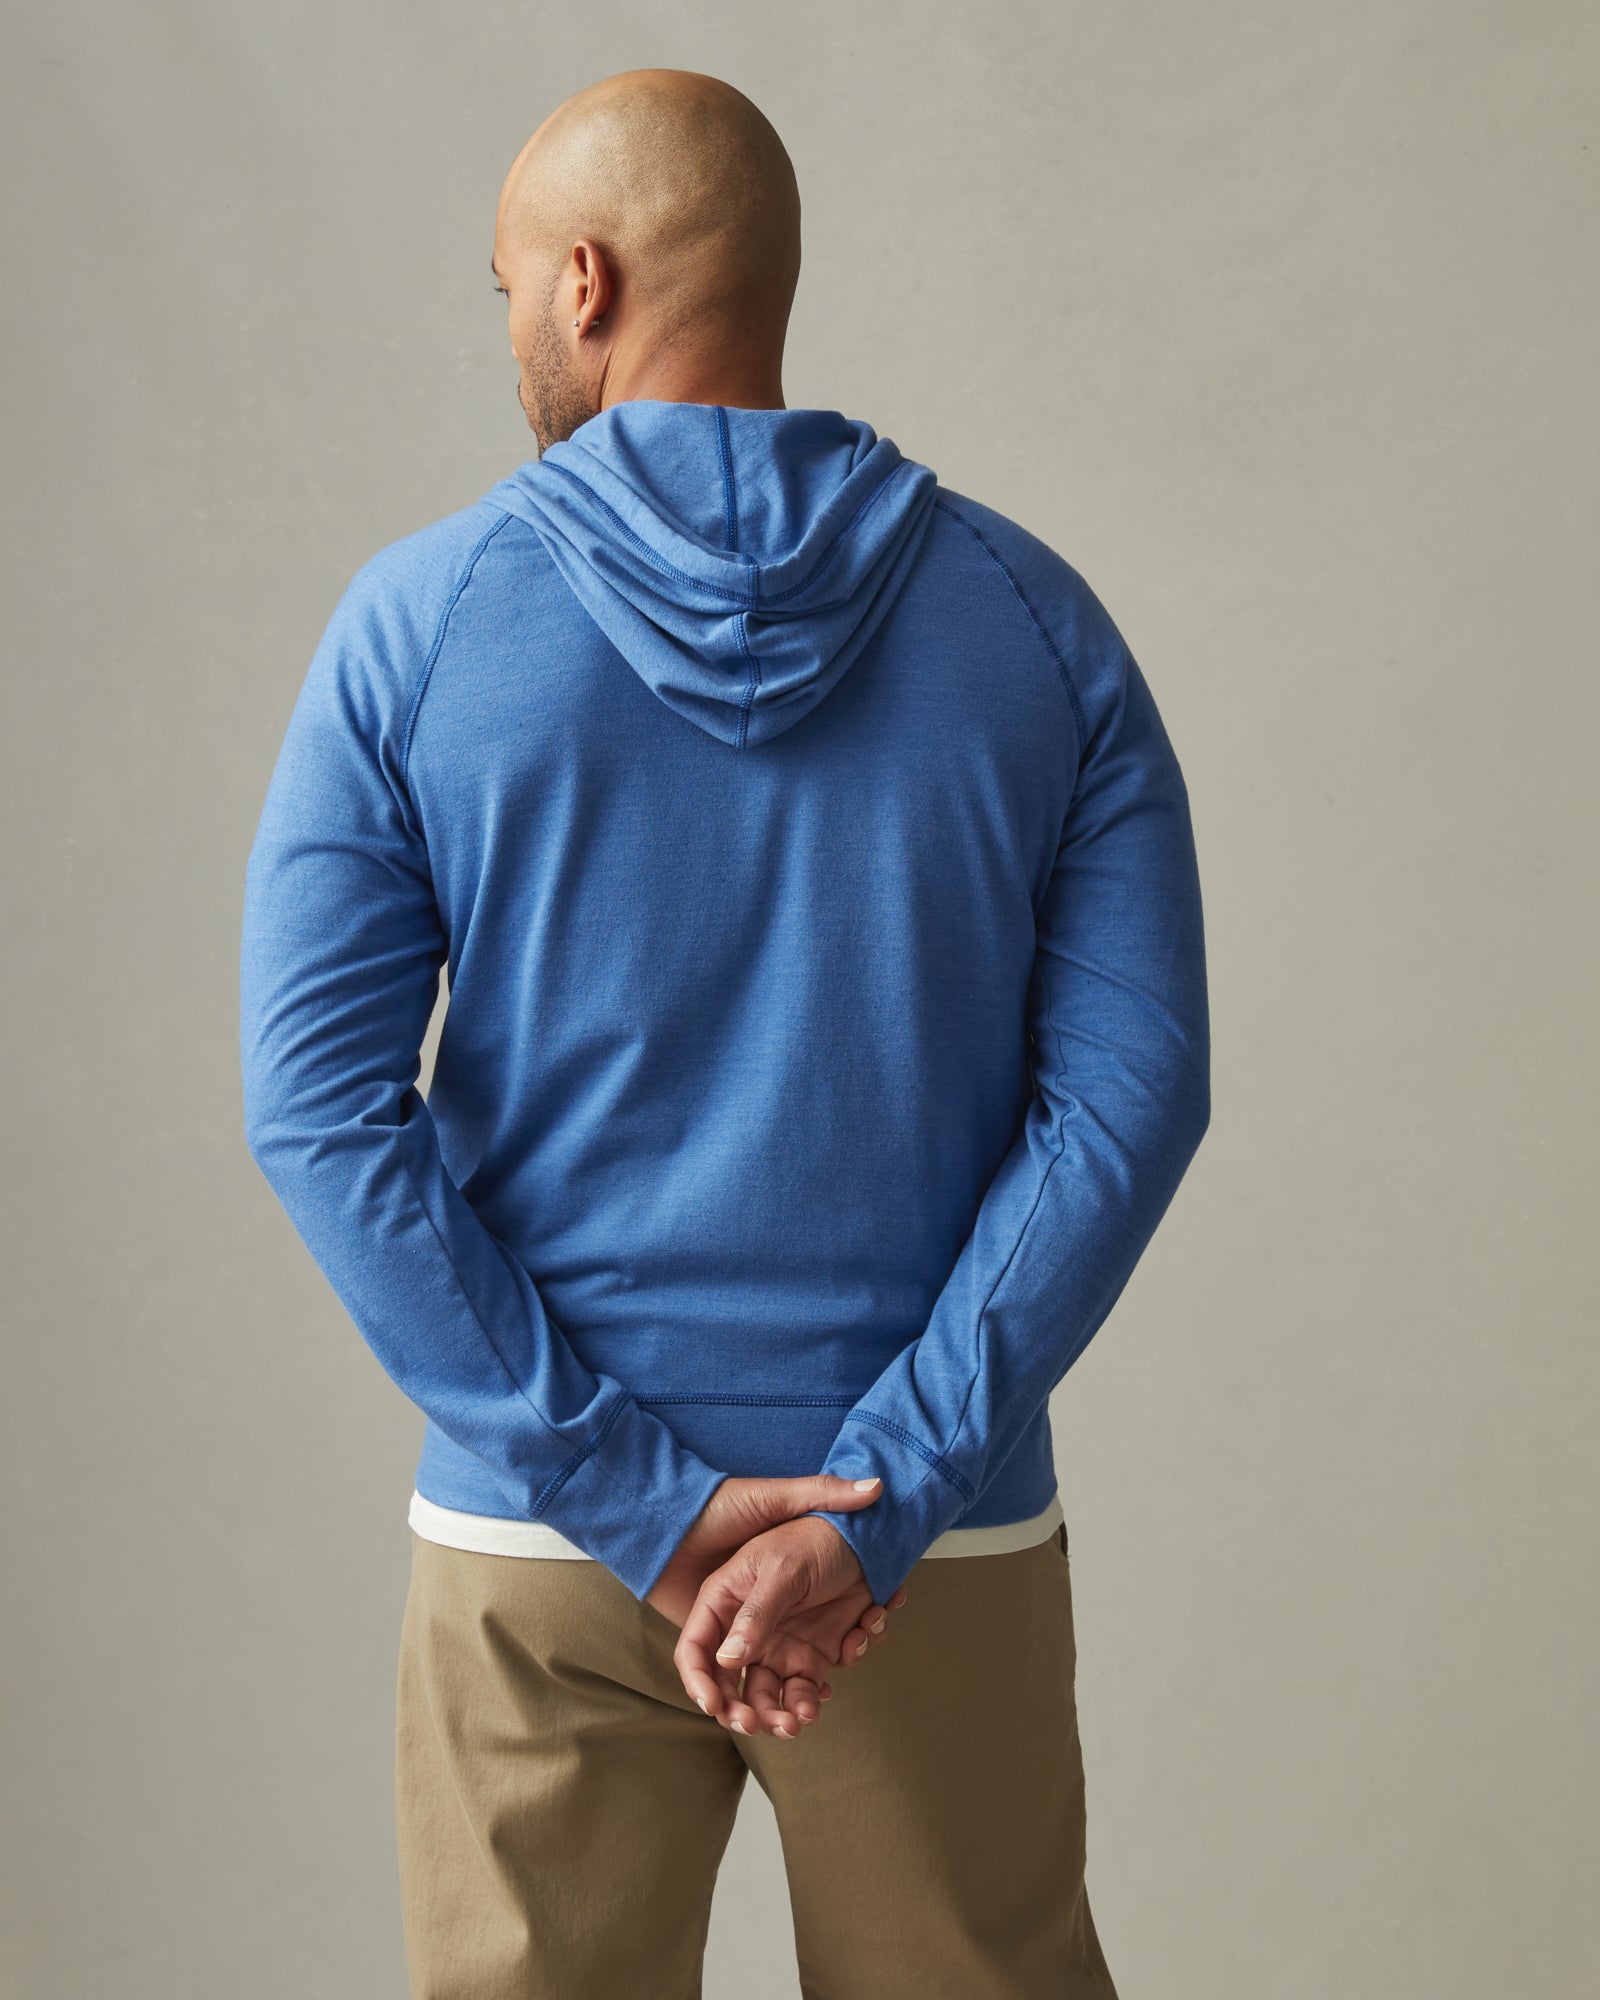 XXL Lightweight Full Zip - Essential Blue by American Giant - Made in The USA